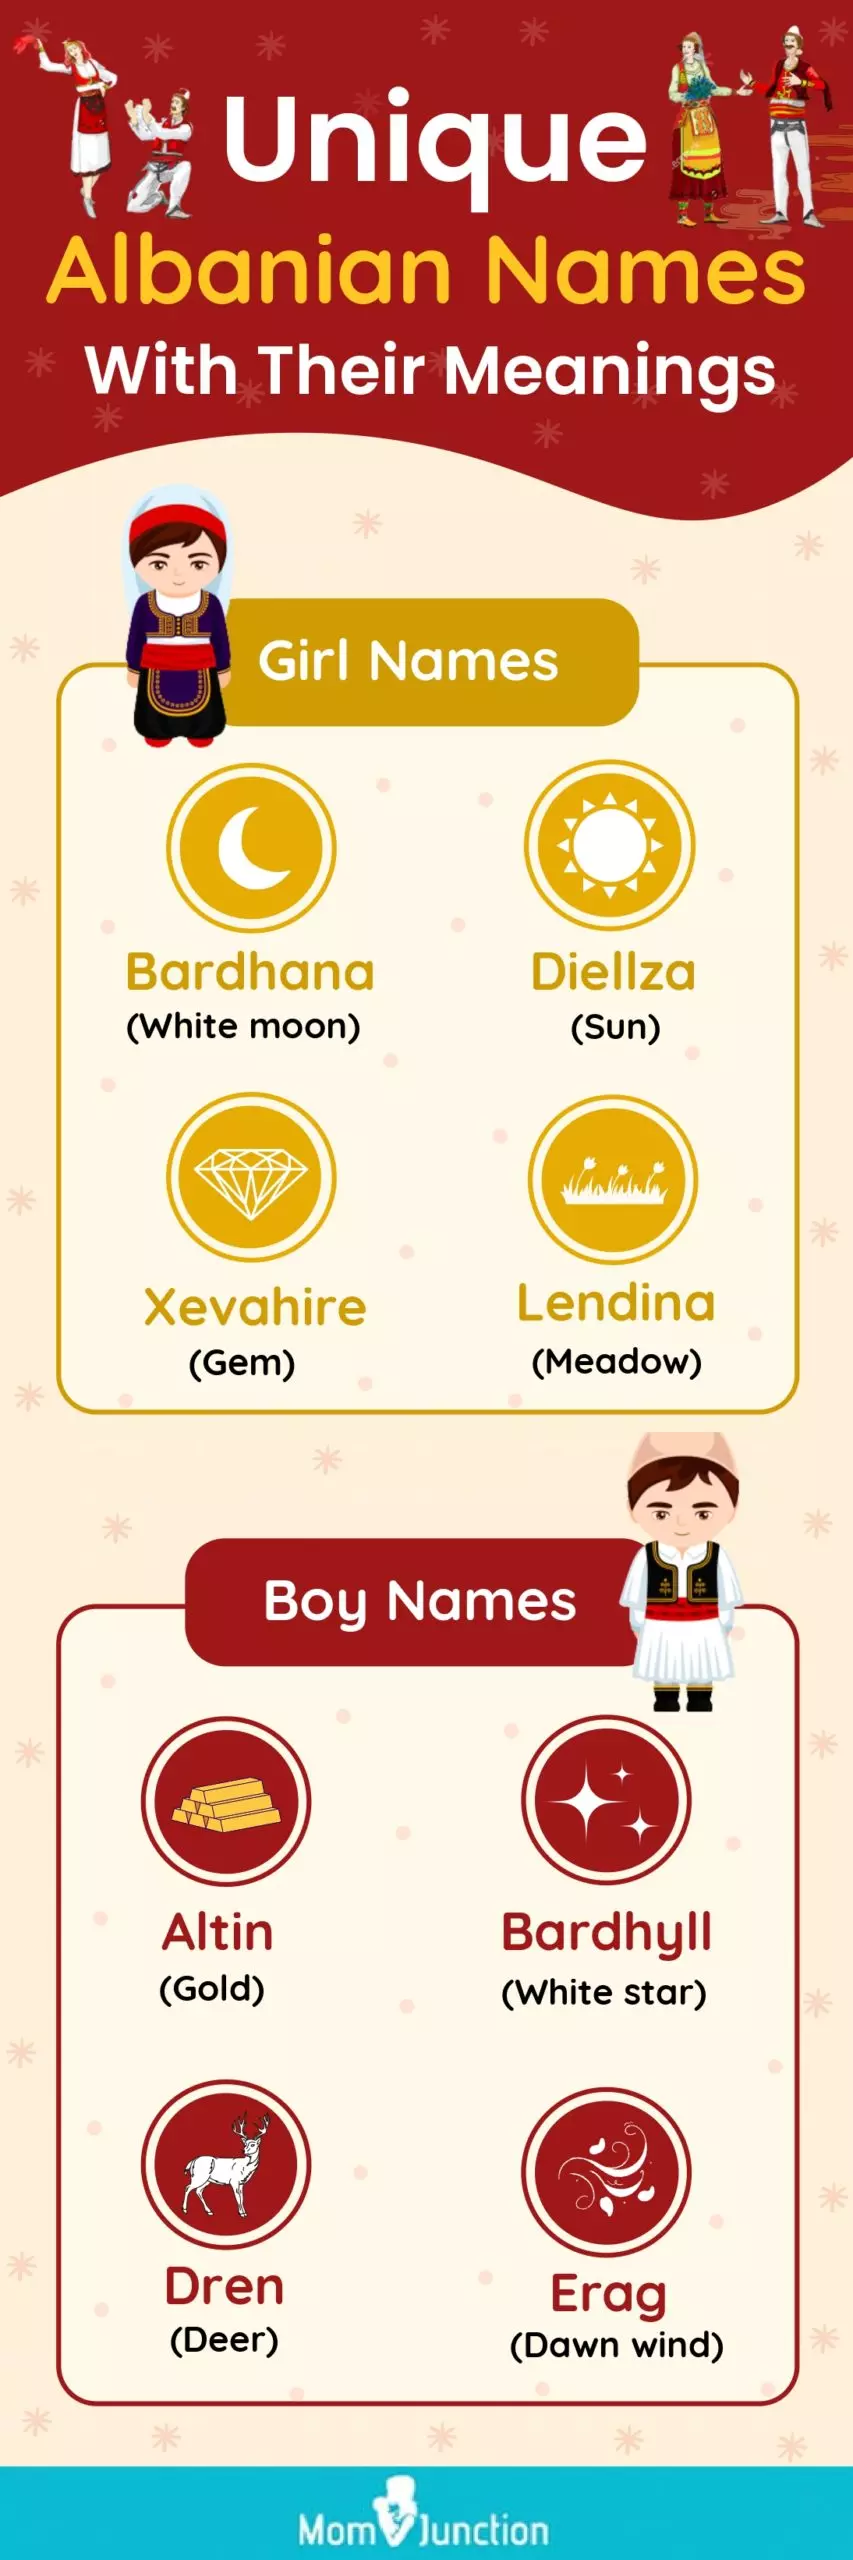 unique albanian names with their meanings (infographic)